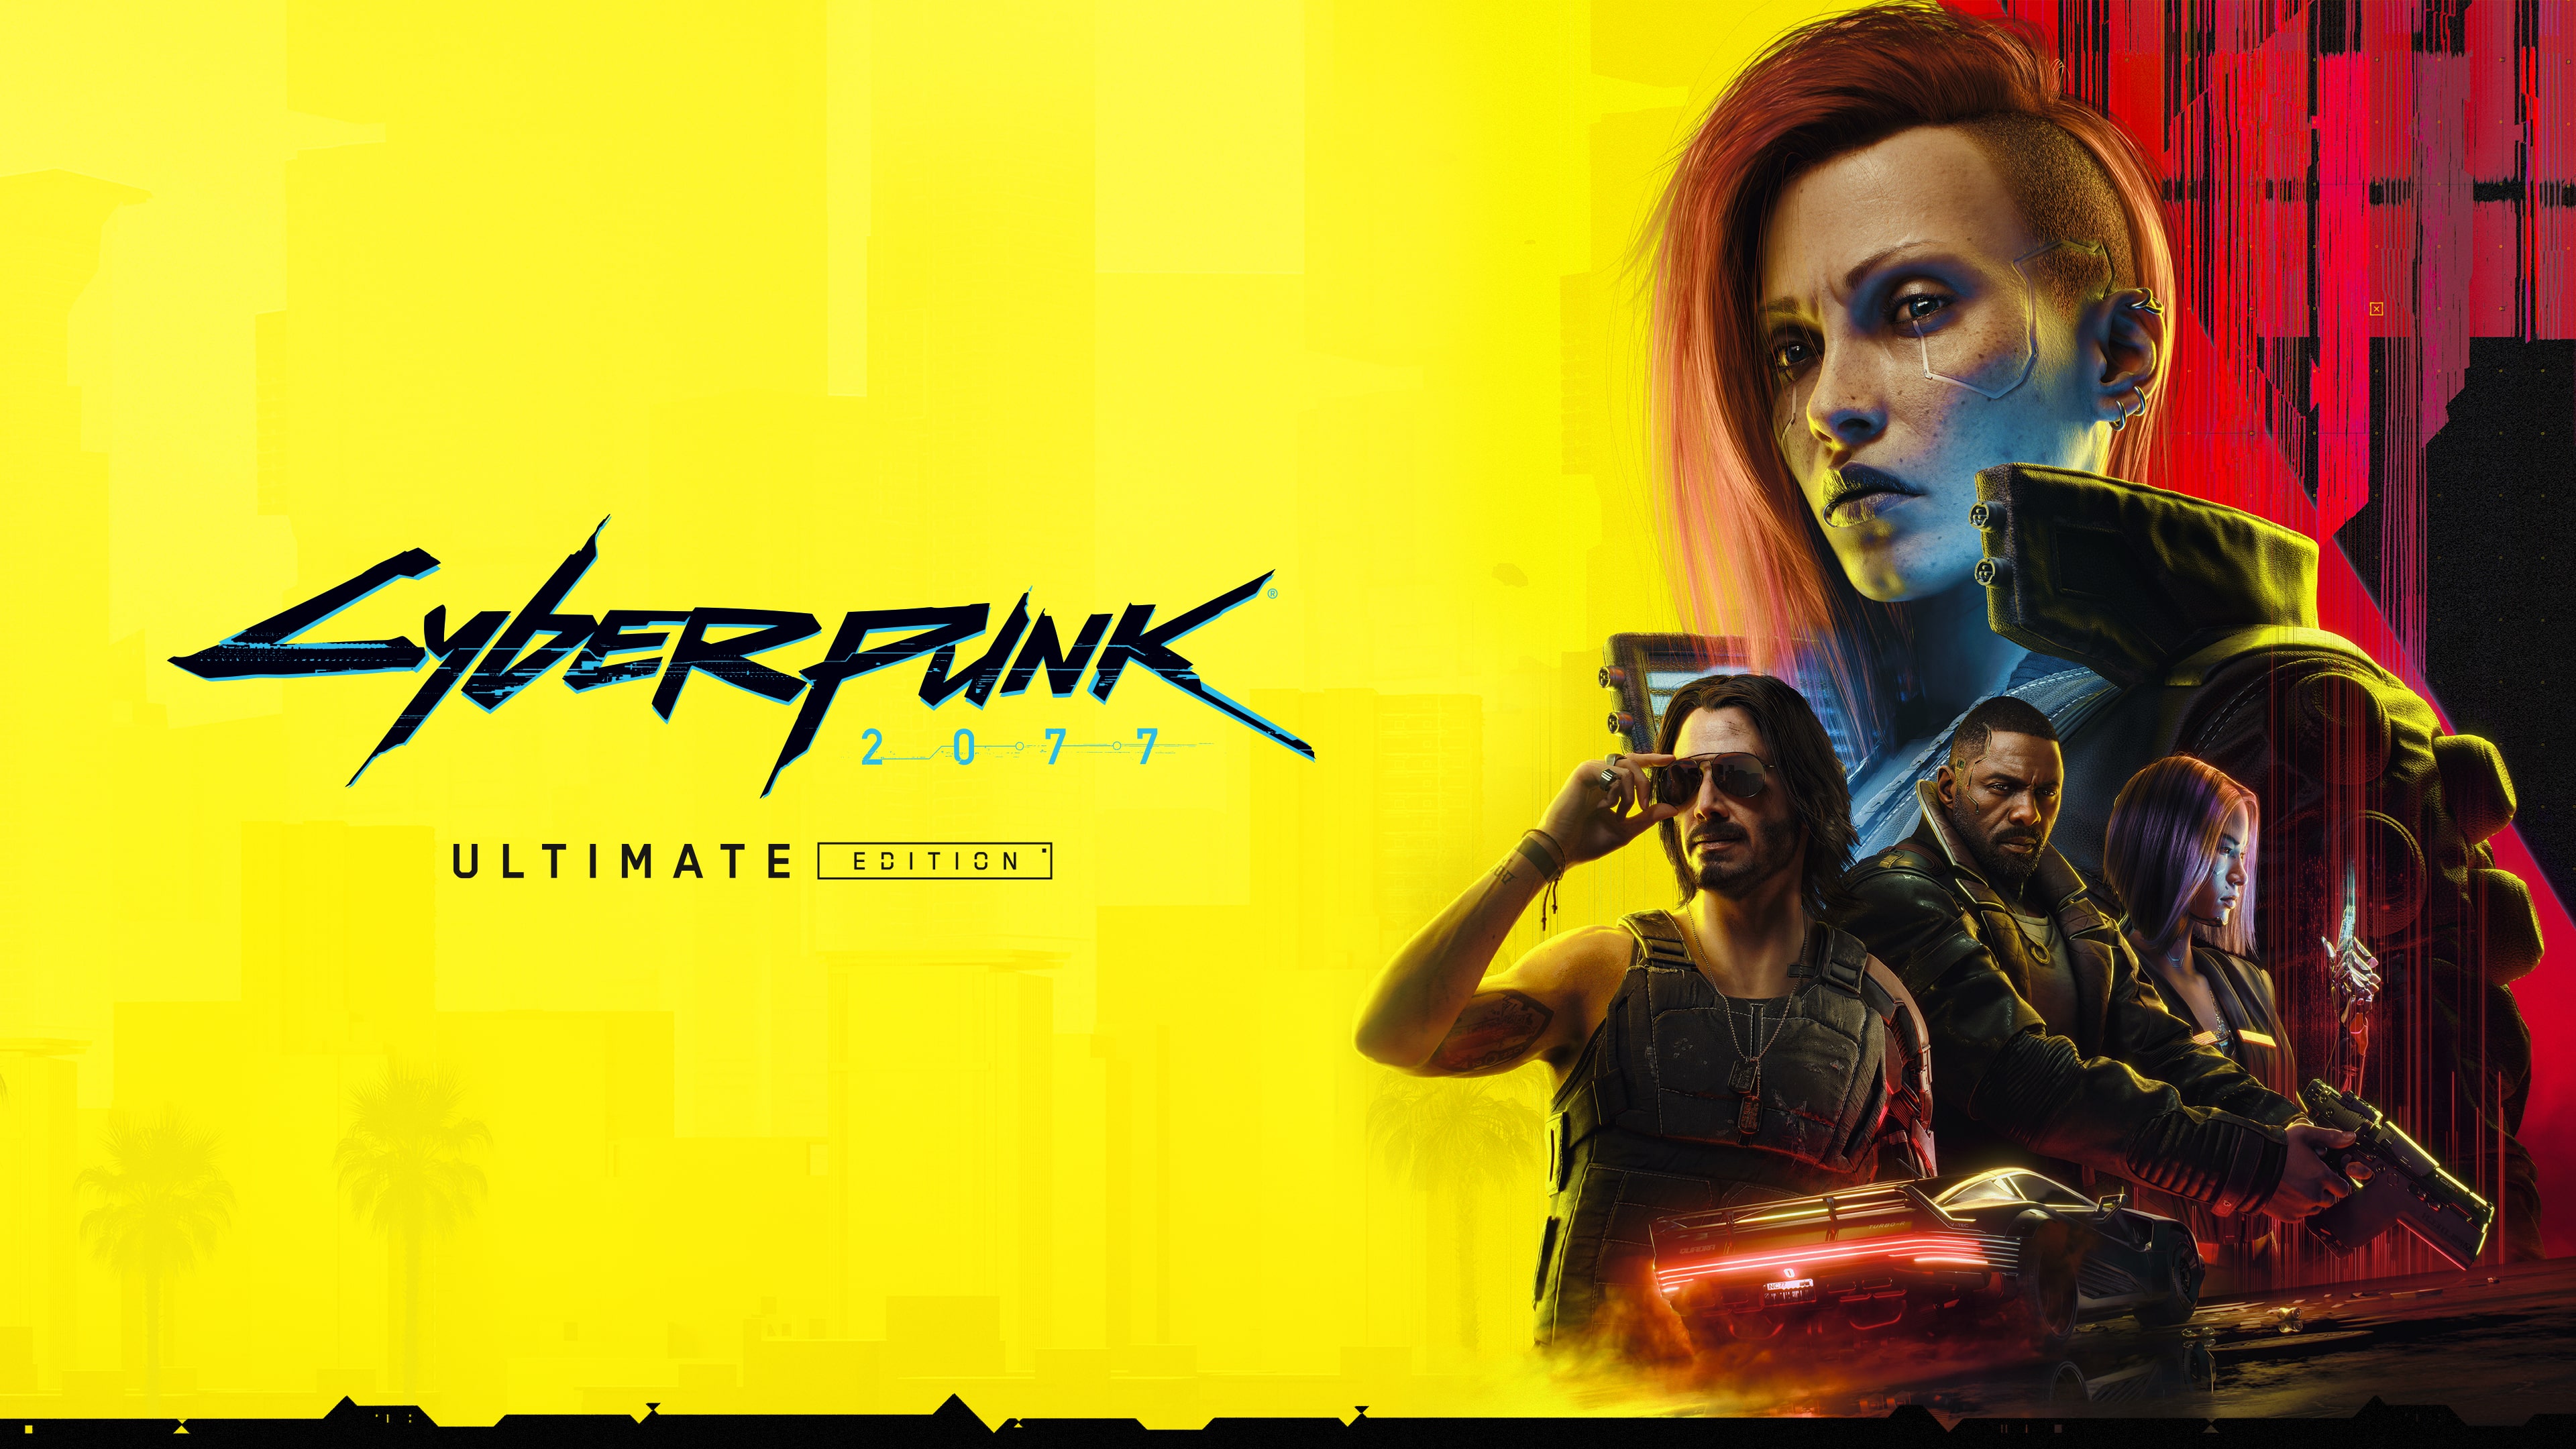 Cyberpunk 2077 - PS4 & PS5 games | PlayStation (US)